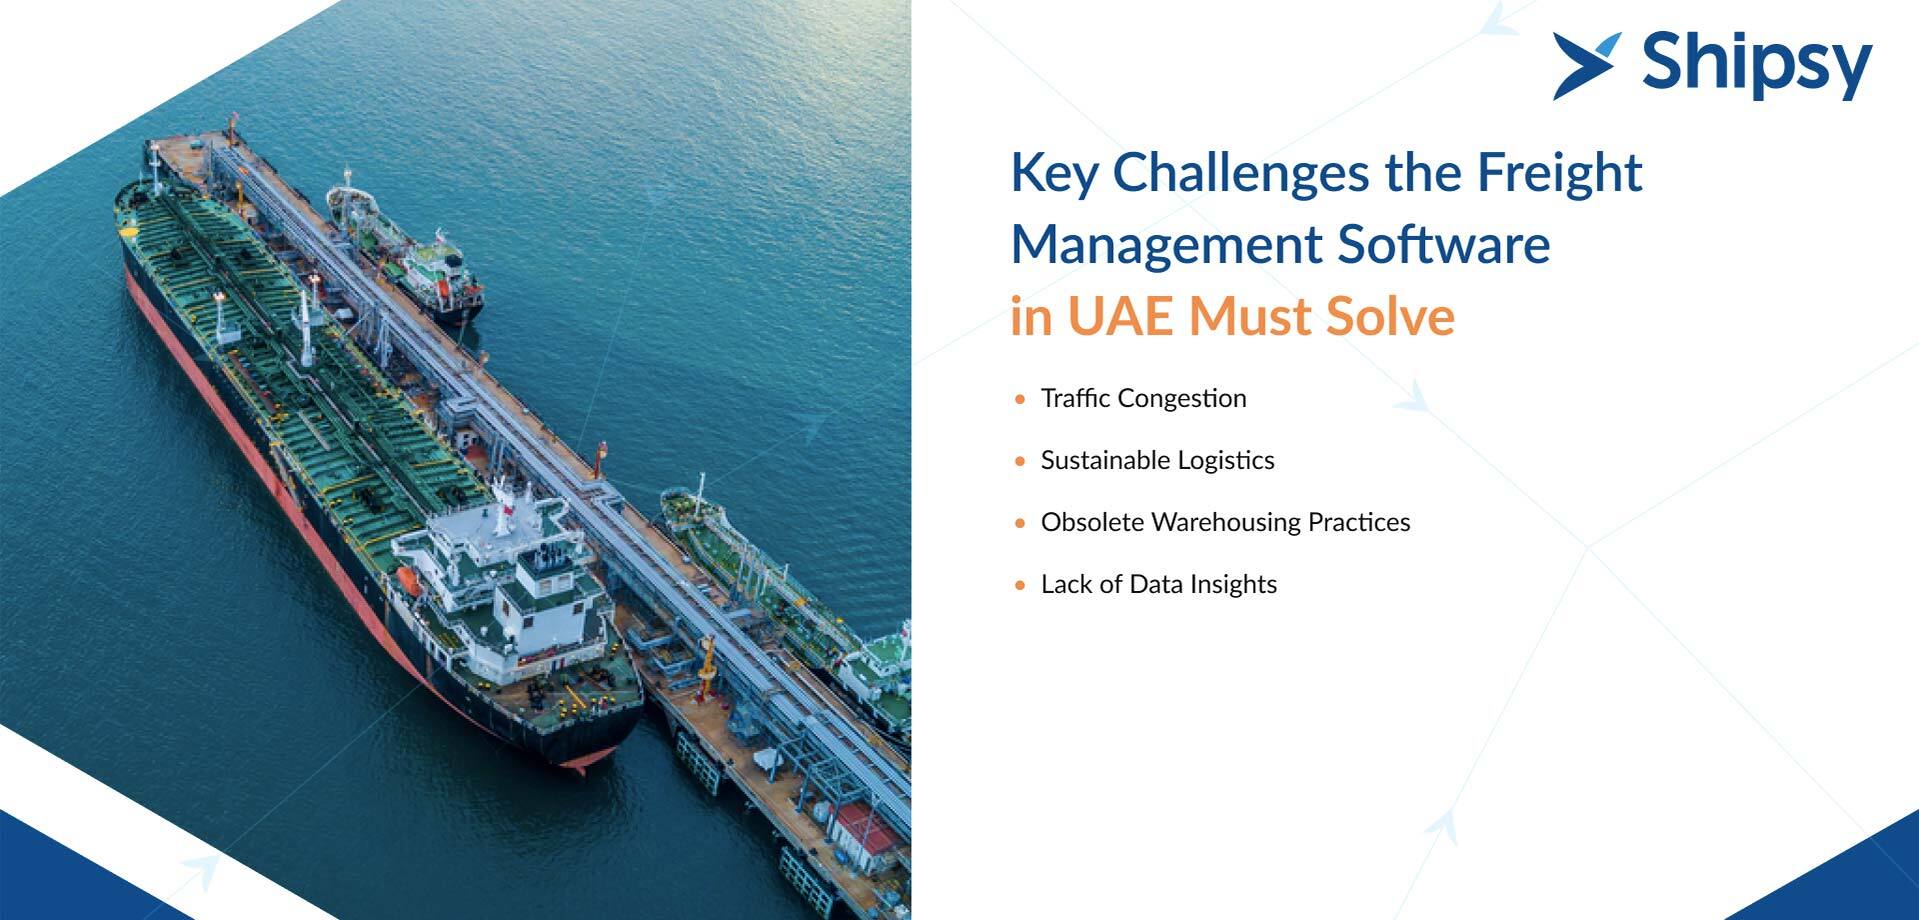 Freight management challenges in UAE